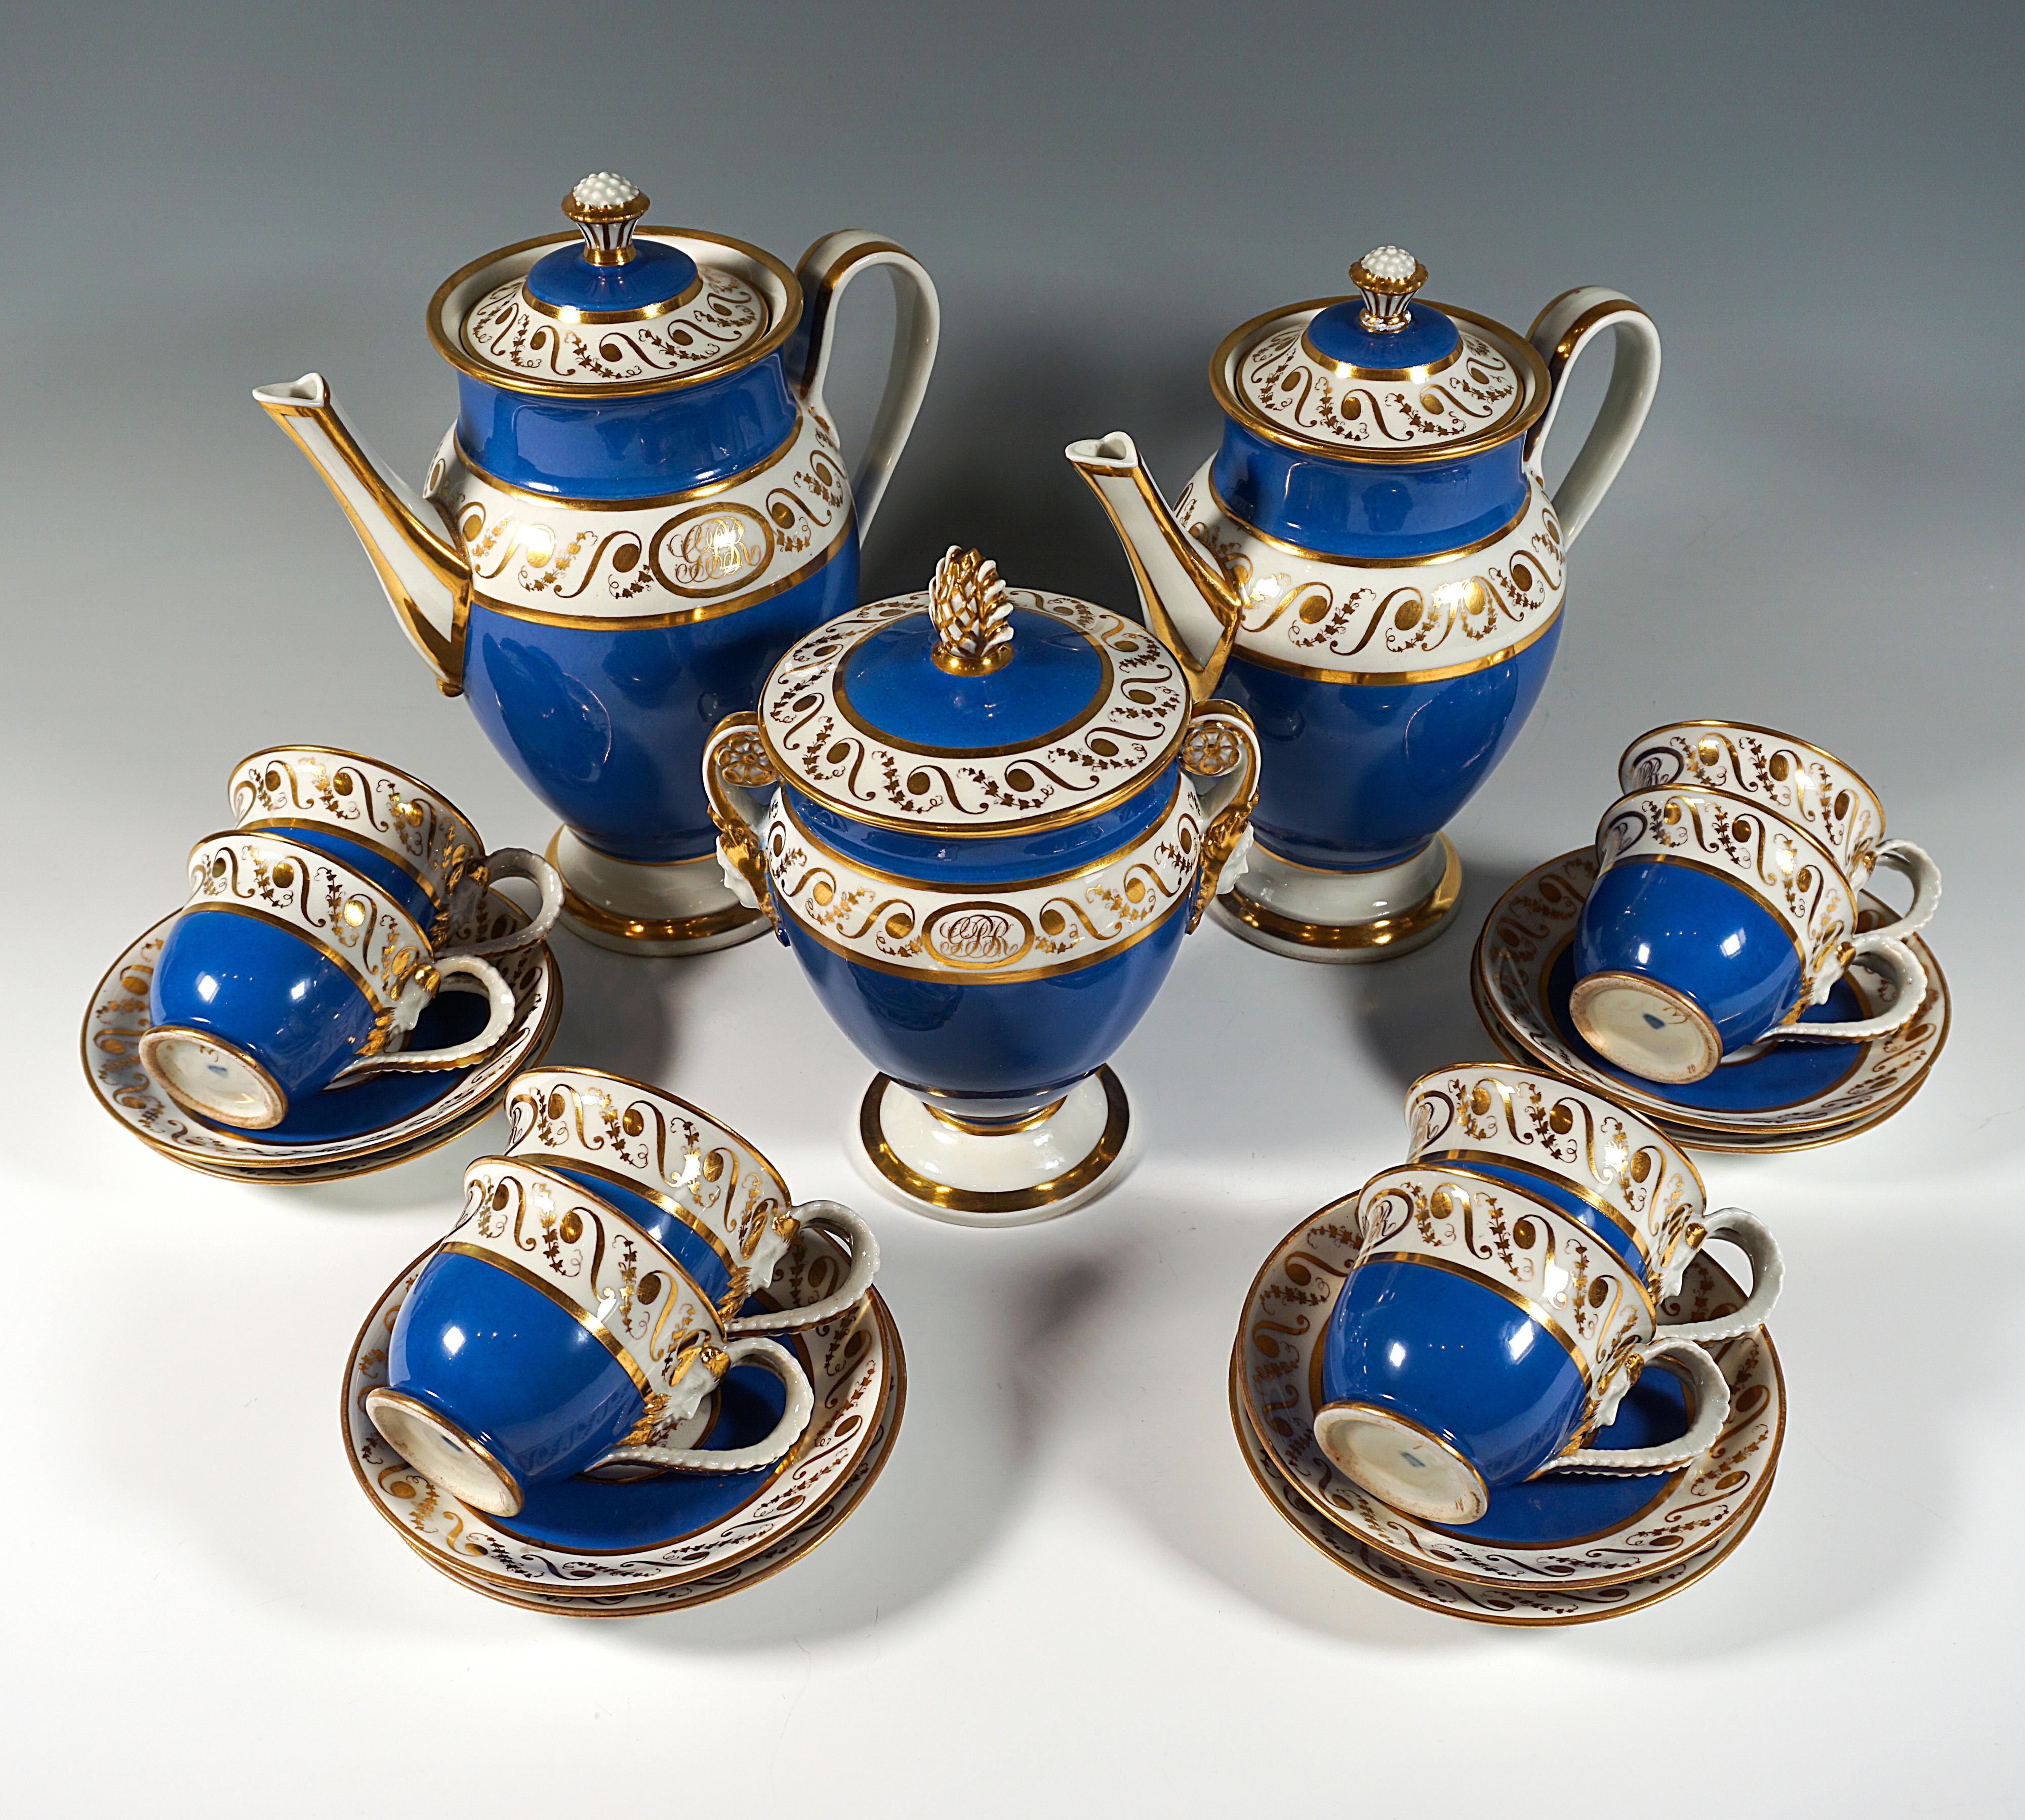 Elegant 19-piece coffee service consisting of a coffee pot, a large milk or hot water pot, a large sugar urn and eight coffee cups with saucers.
Large bulbous vessels on stepped stand, the jugs with raised handles have set slender spouts stretching